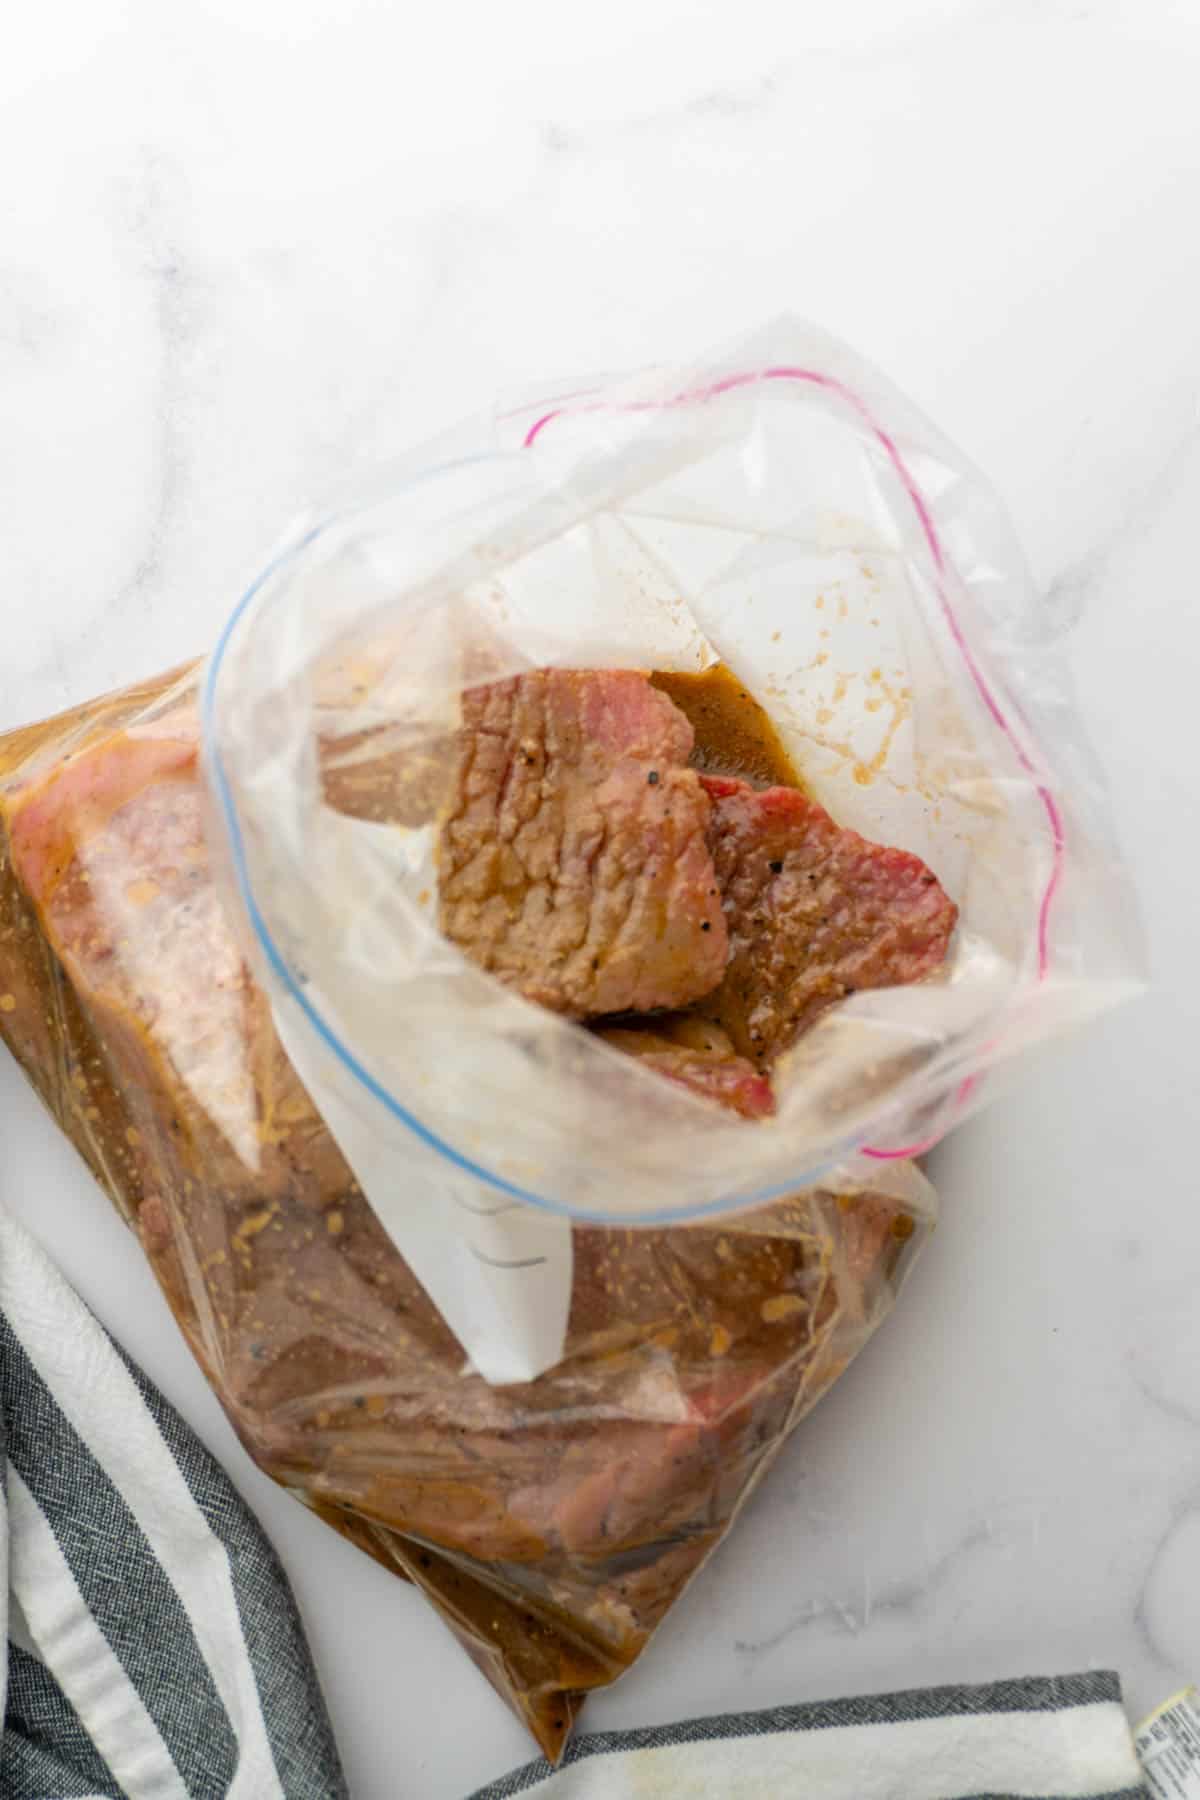 Cube steak in the marinade inside the plastic bag.